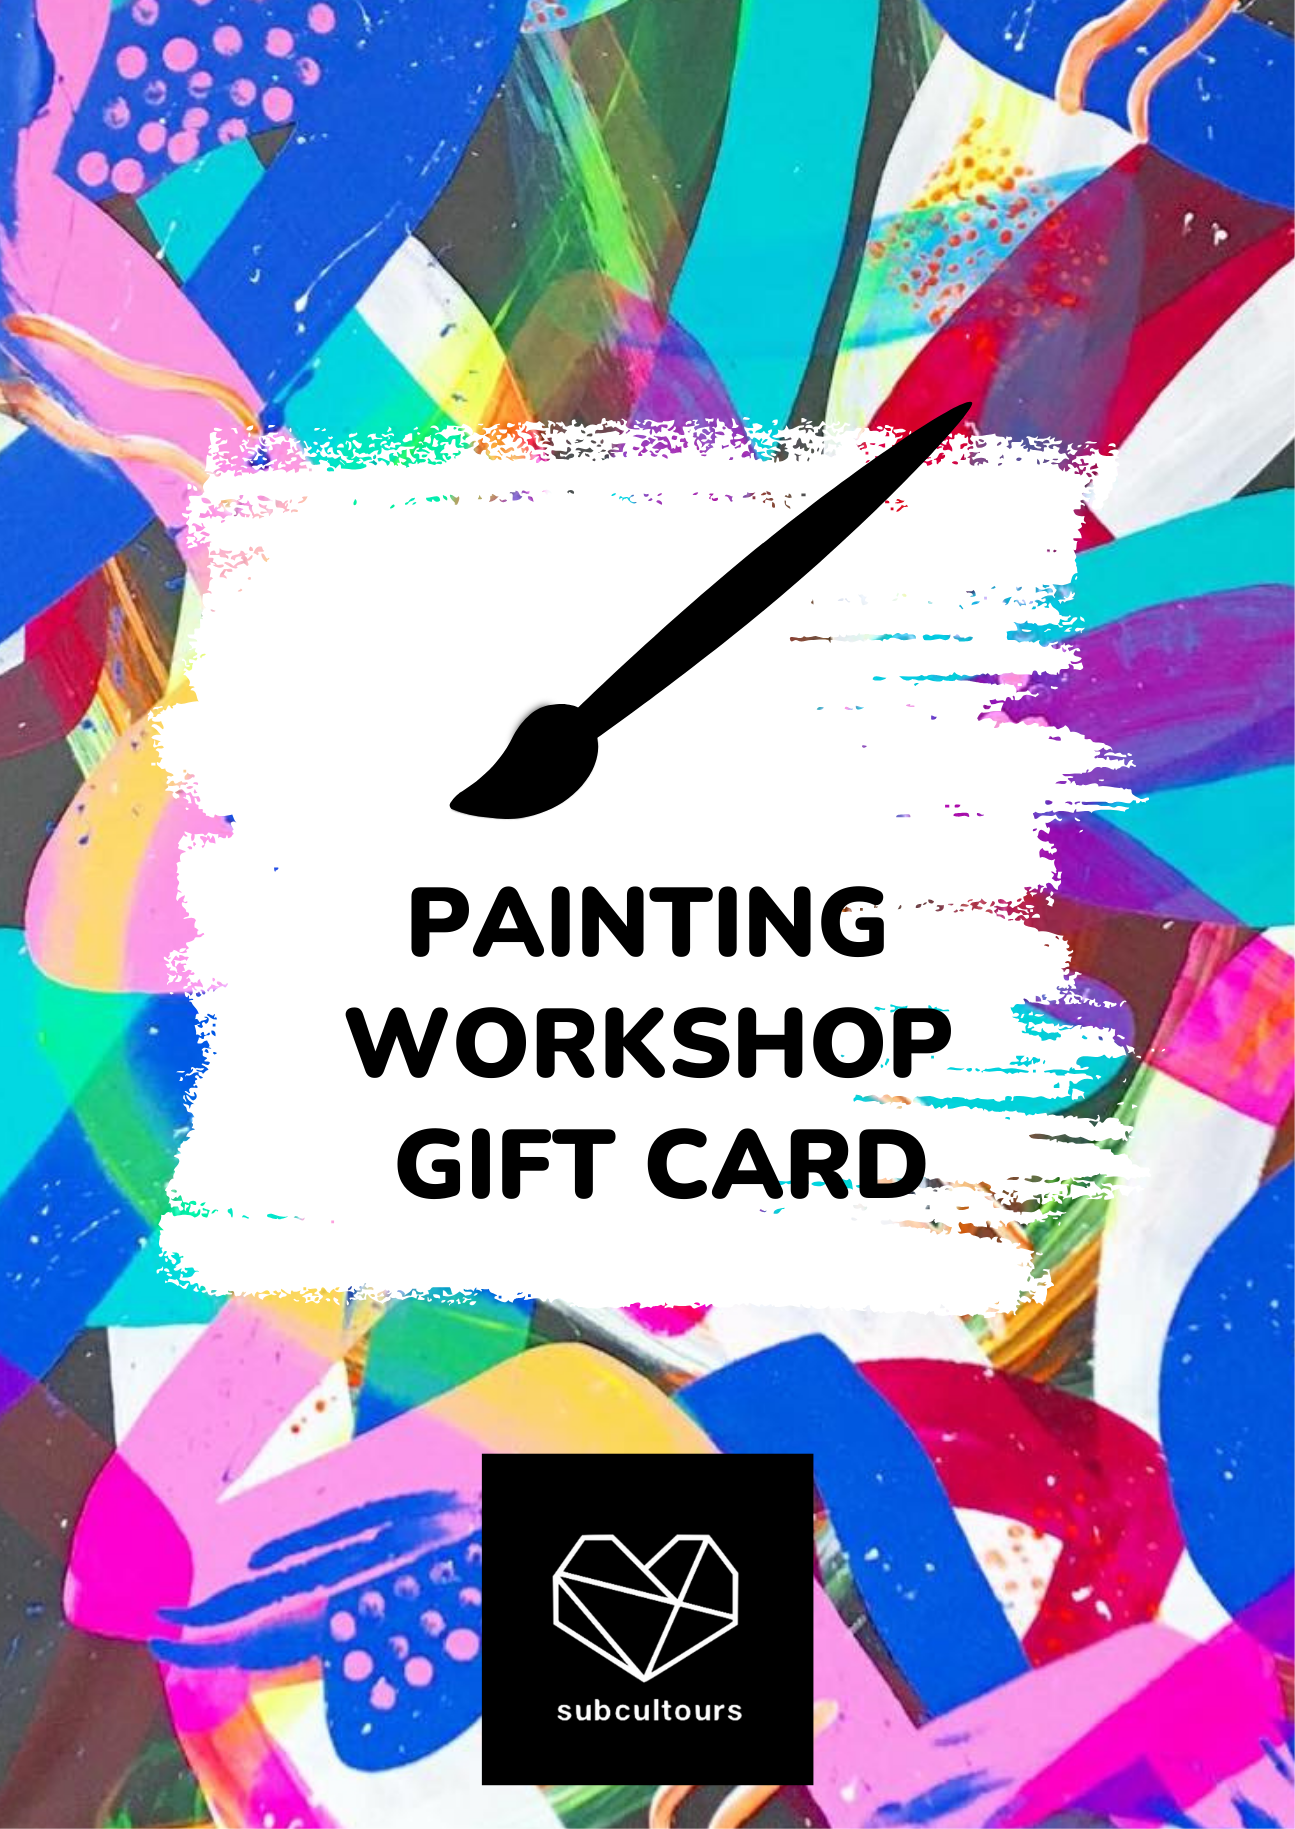 Painting Workshop Gift Card by subcultours